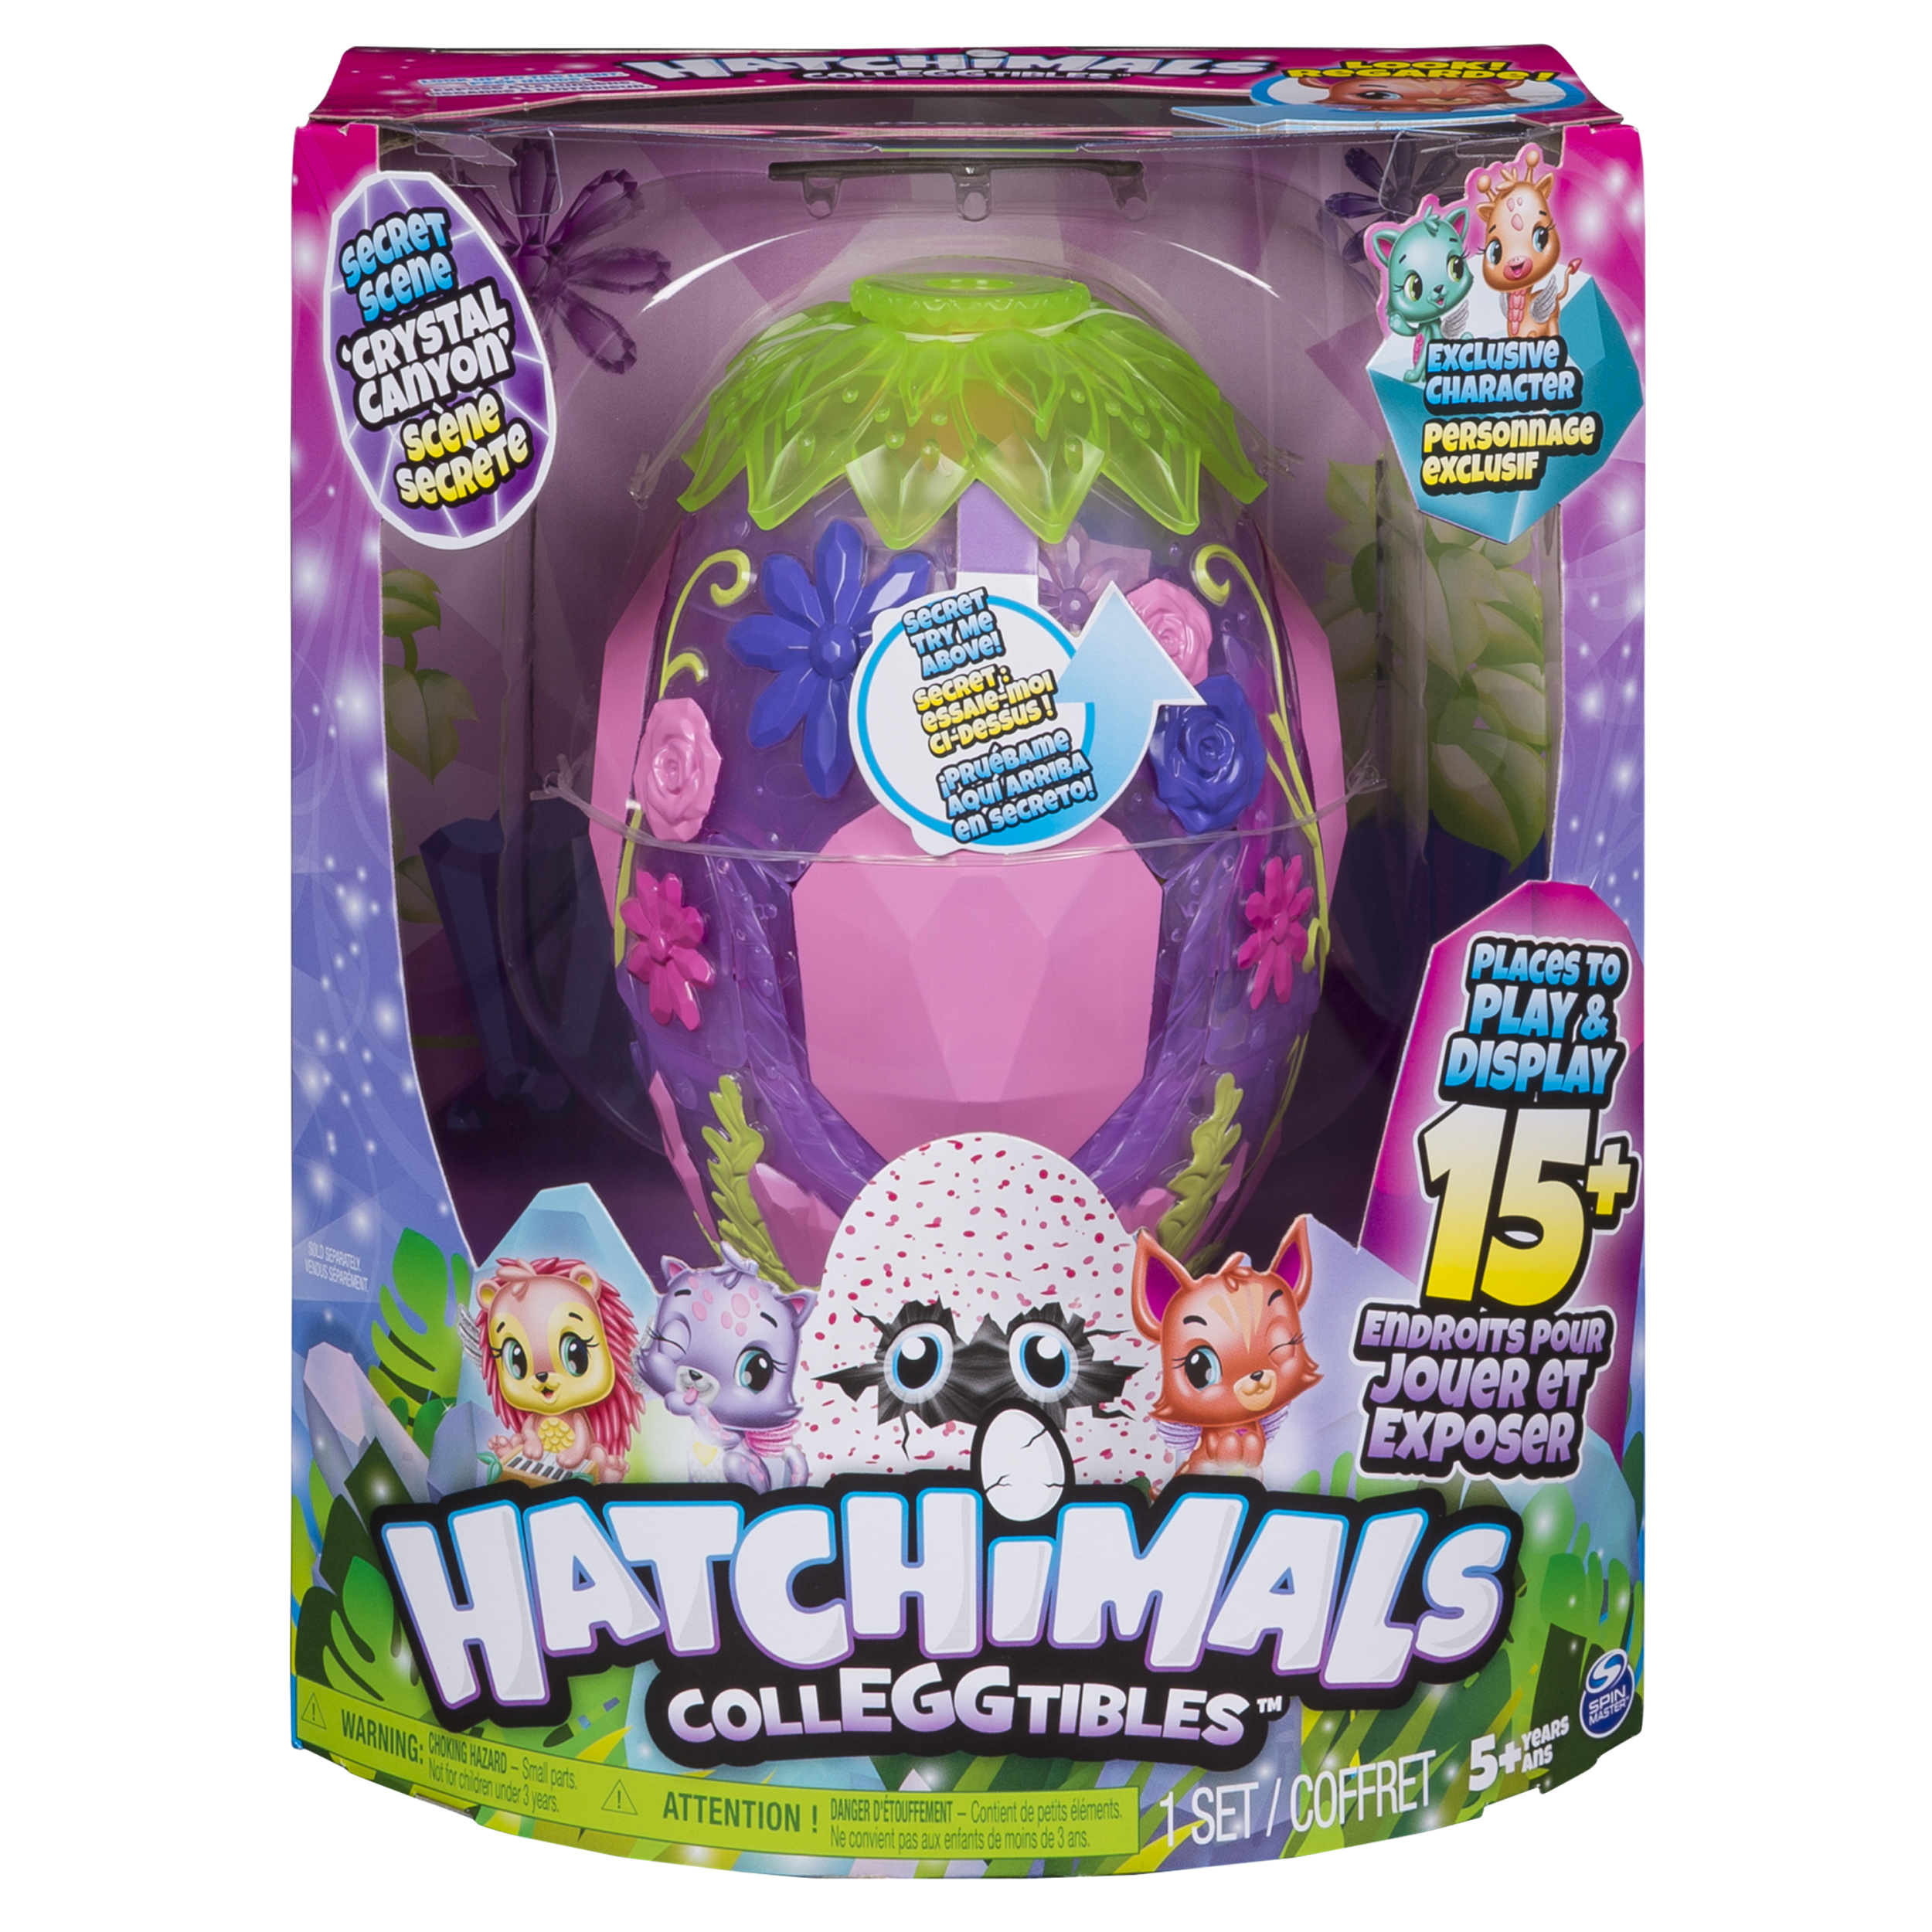 Hatchimals CollEGGtibles, Crystal Canyon Secret Scene Playset with Exclusive Hatchimals CollEGGtible - image 2 of 8